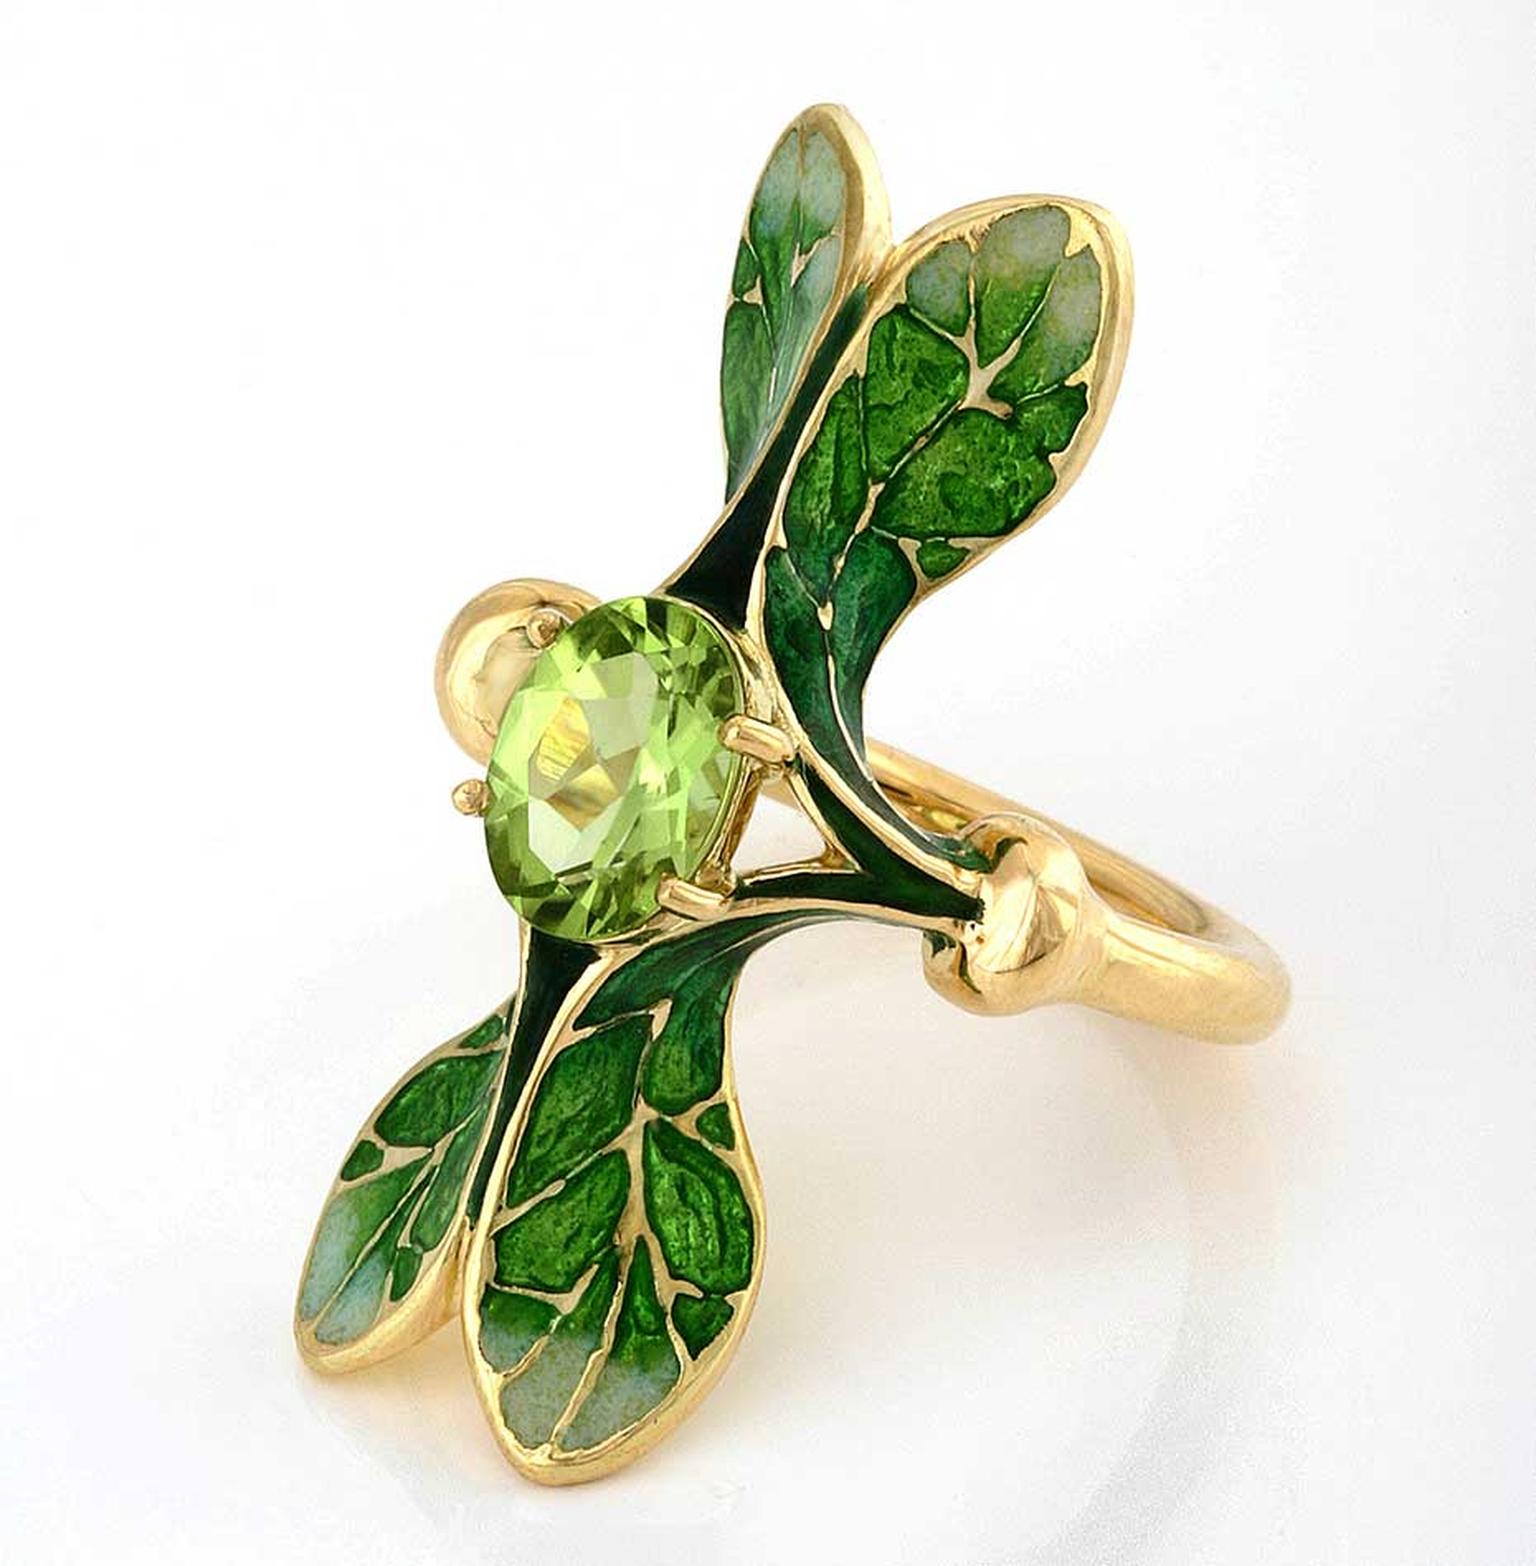 Ilgiz F "Lalique" ring with grand feu enamelling, set with a peridot